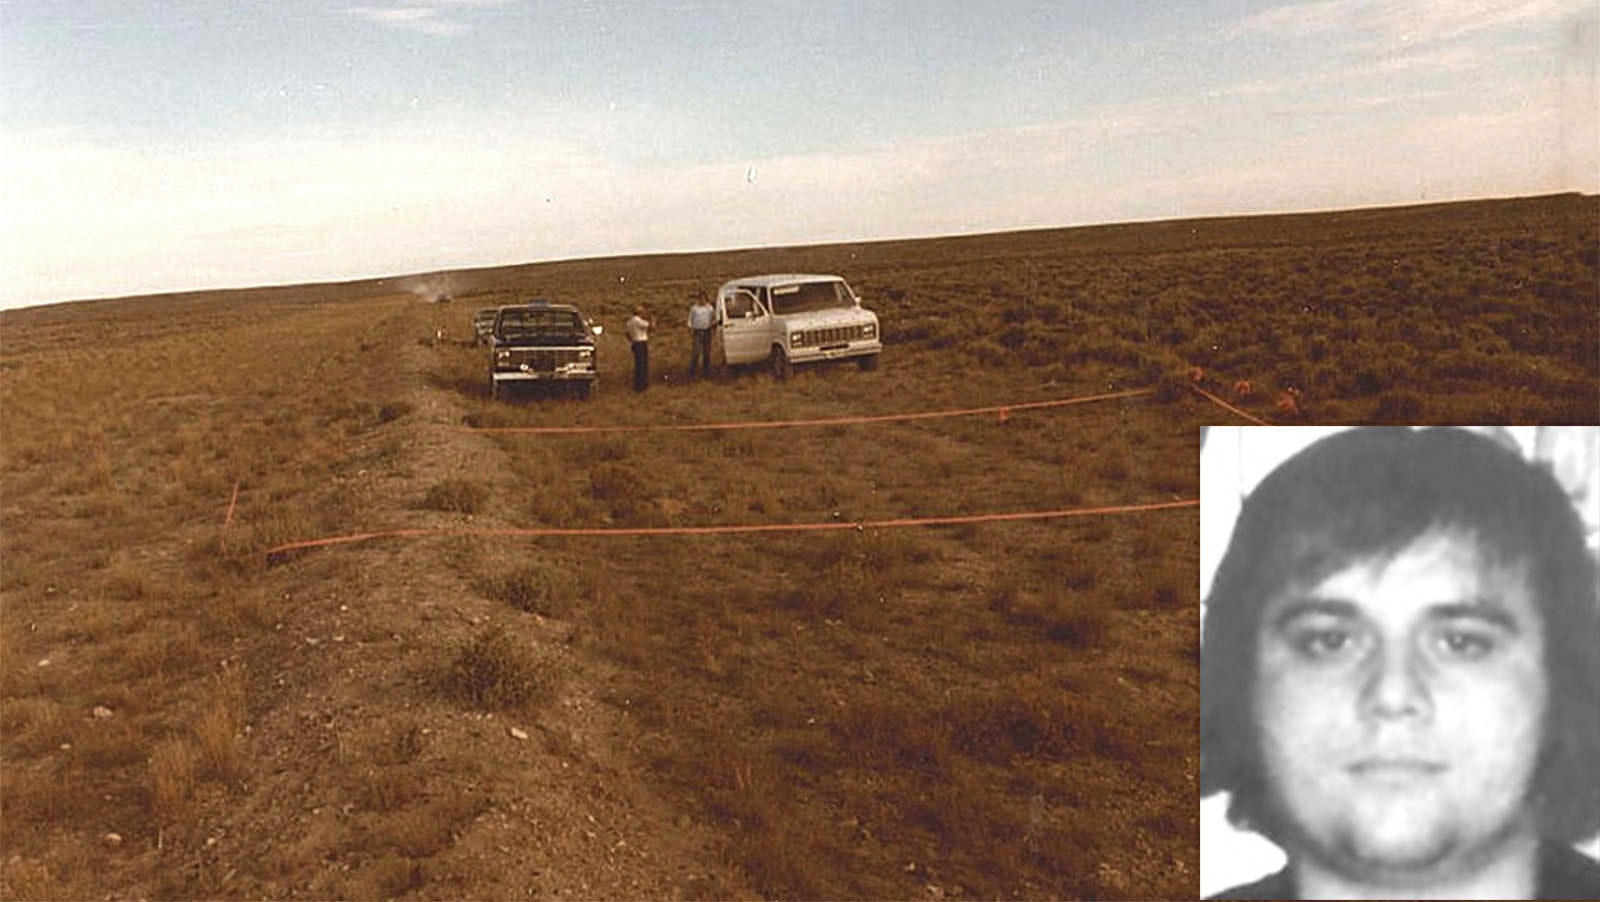 Jack Clawson, 24, has been identified through DNA as the remains of a man found near Granger, Wyoming, in 1982.